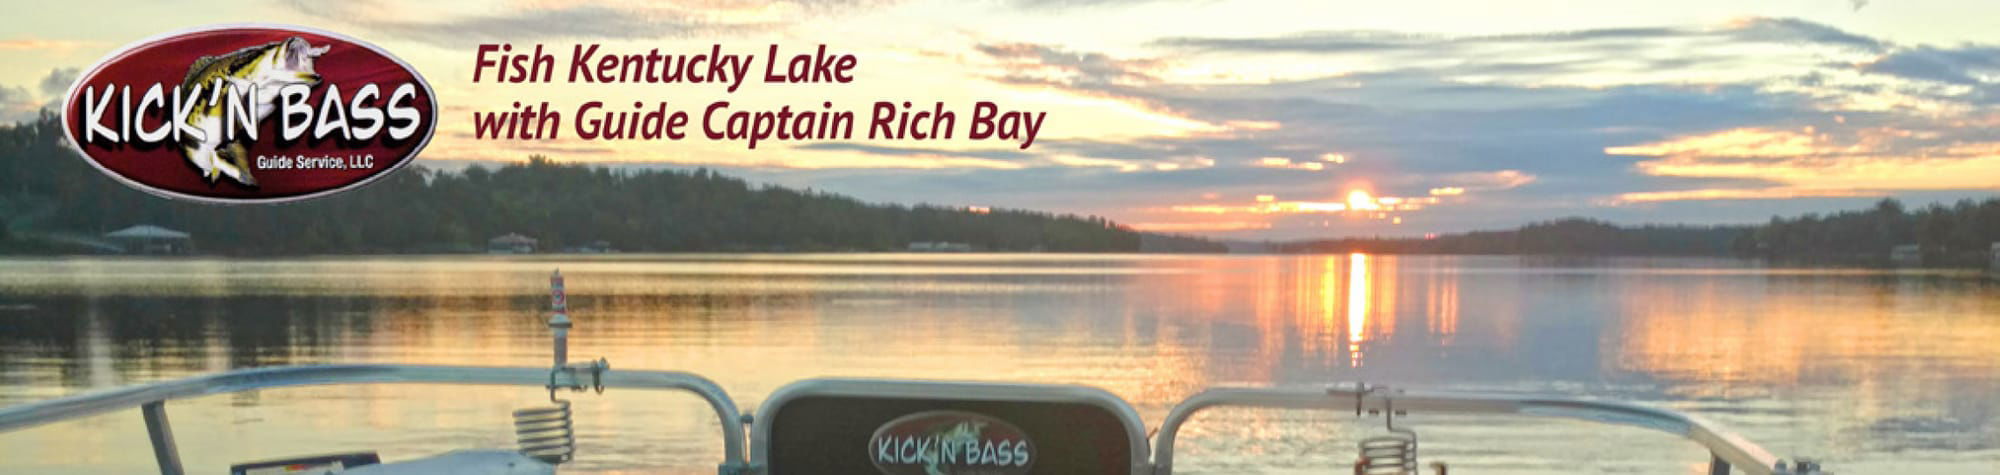 Your Kick'n Bass Fishing Report for October 17, 2018